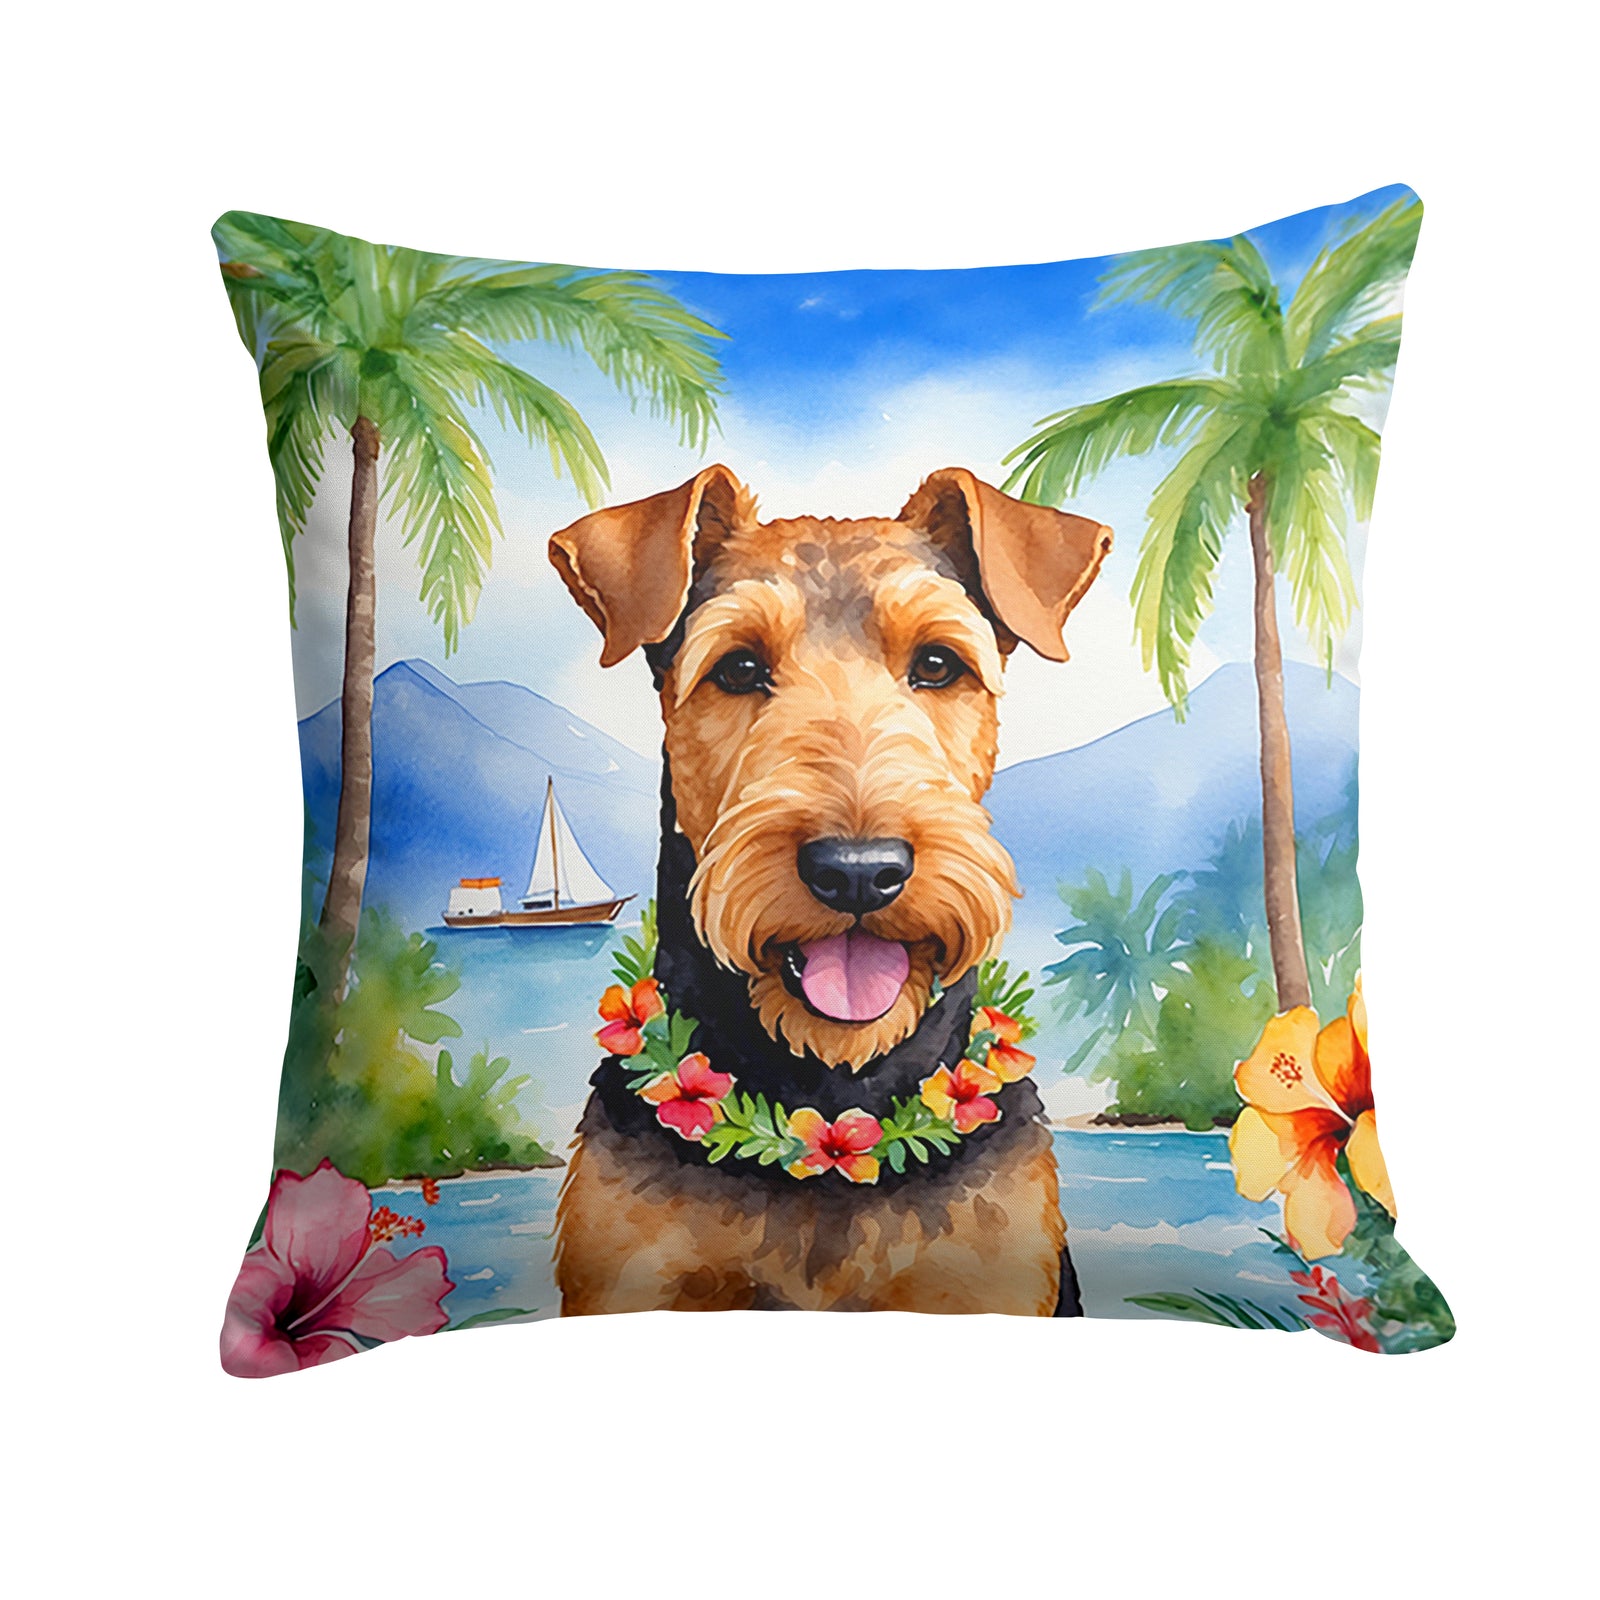 Buy this Airedale Terrier Luau Throw Pillow